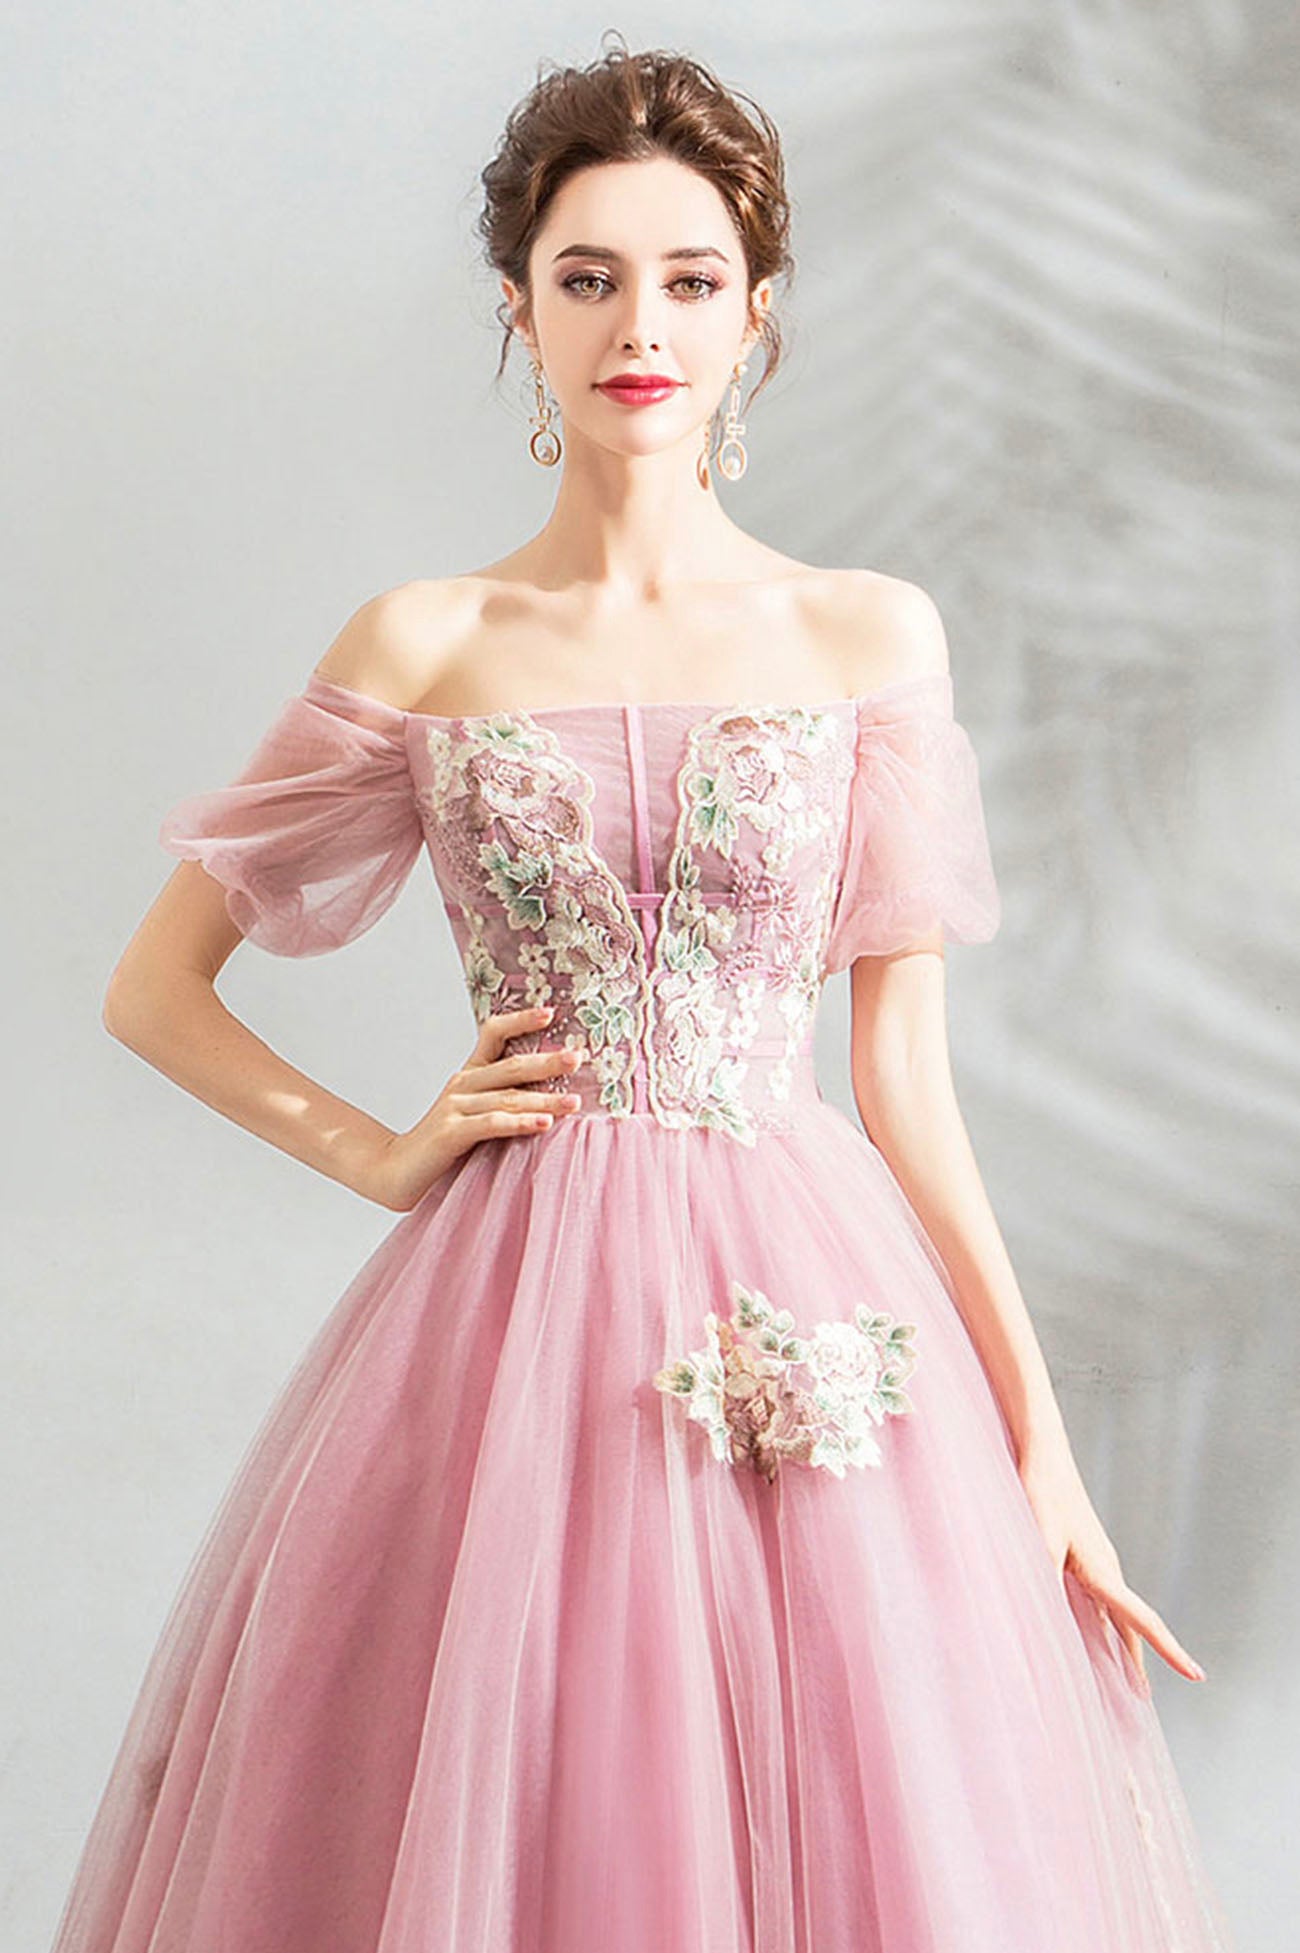 Pink Lace Long A-Line Prom Dress, Off the Shoulder Evening Party Dress